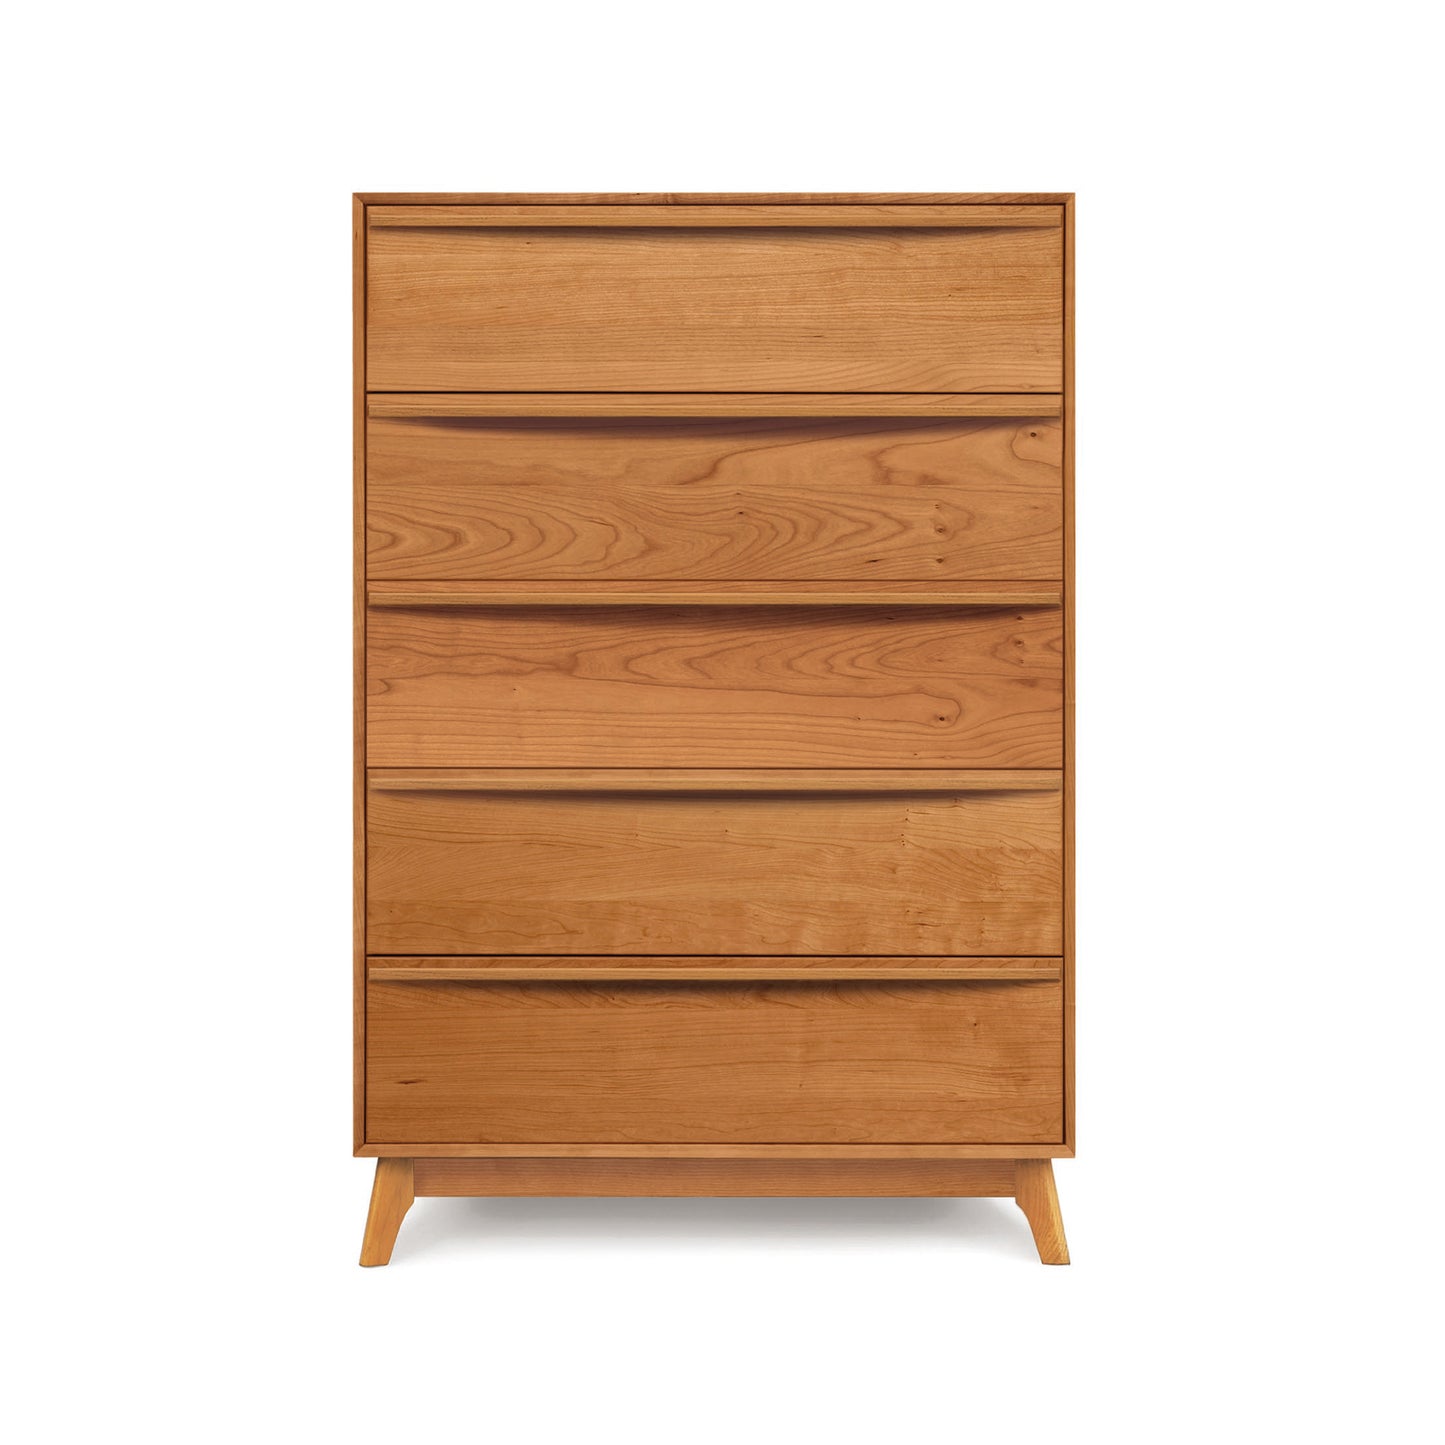 Copeland Furniture's Catalina 5-Drawer Wide Chest on a white background.